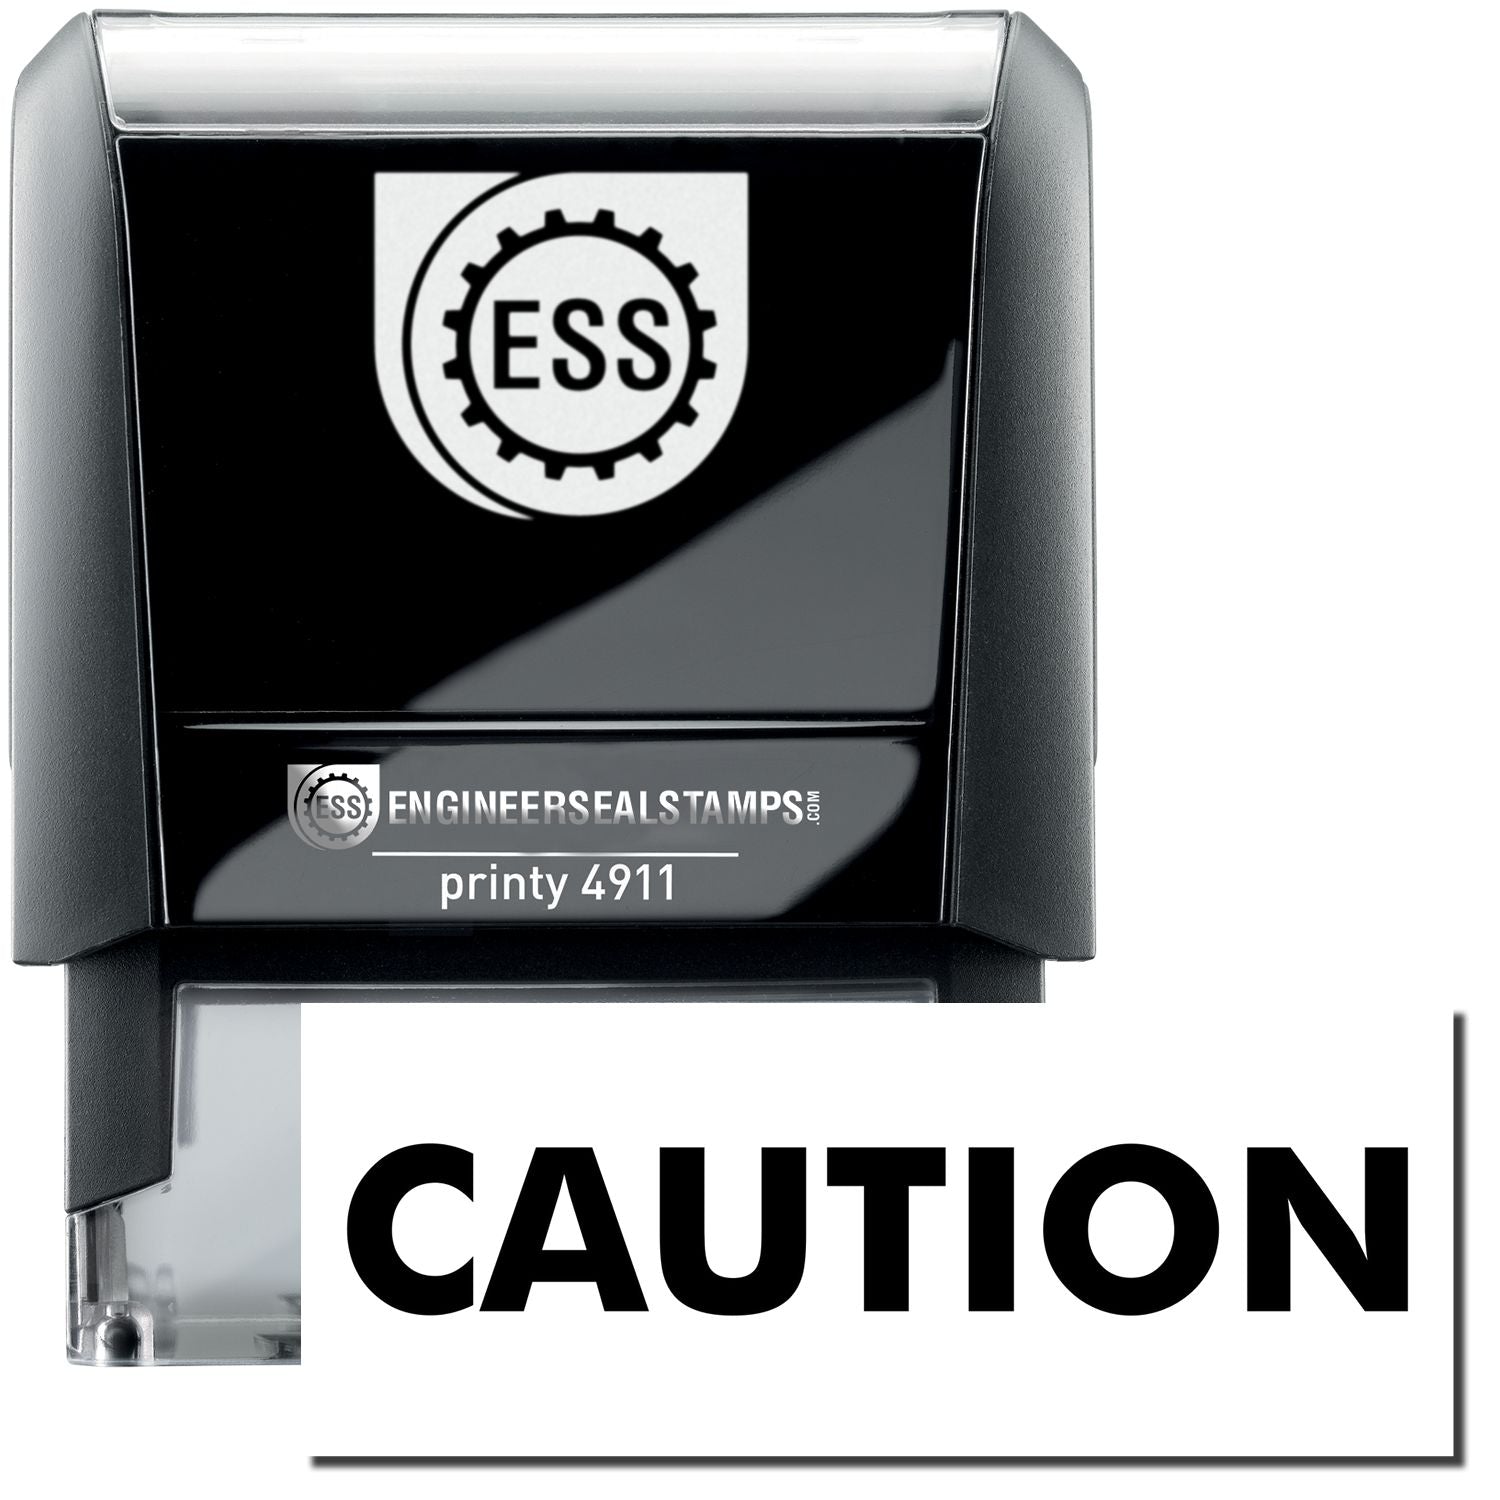 A self-inking stamp with a stamped image showing how the text "CAUTION" is displayed after stamping.